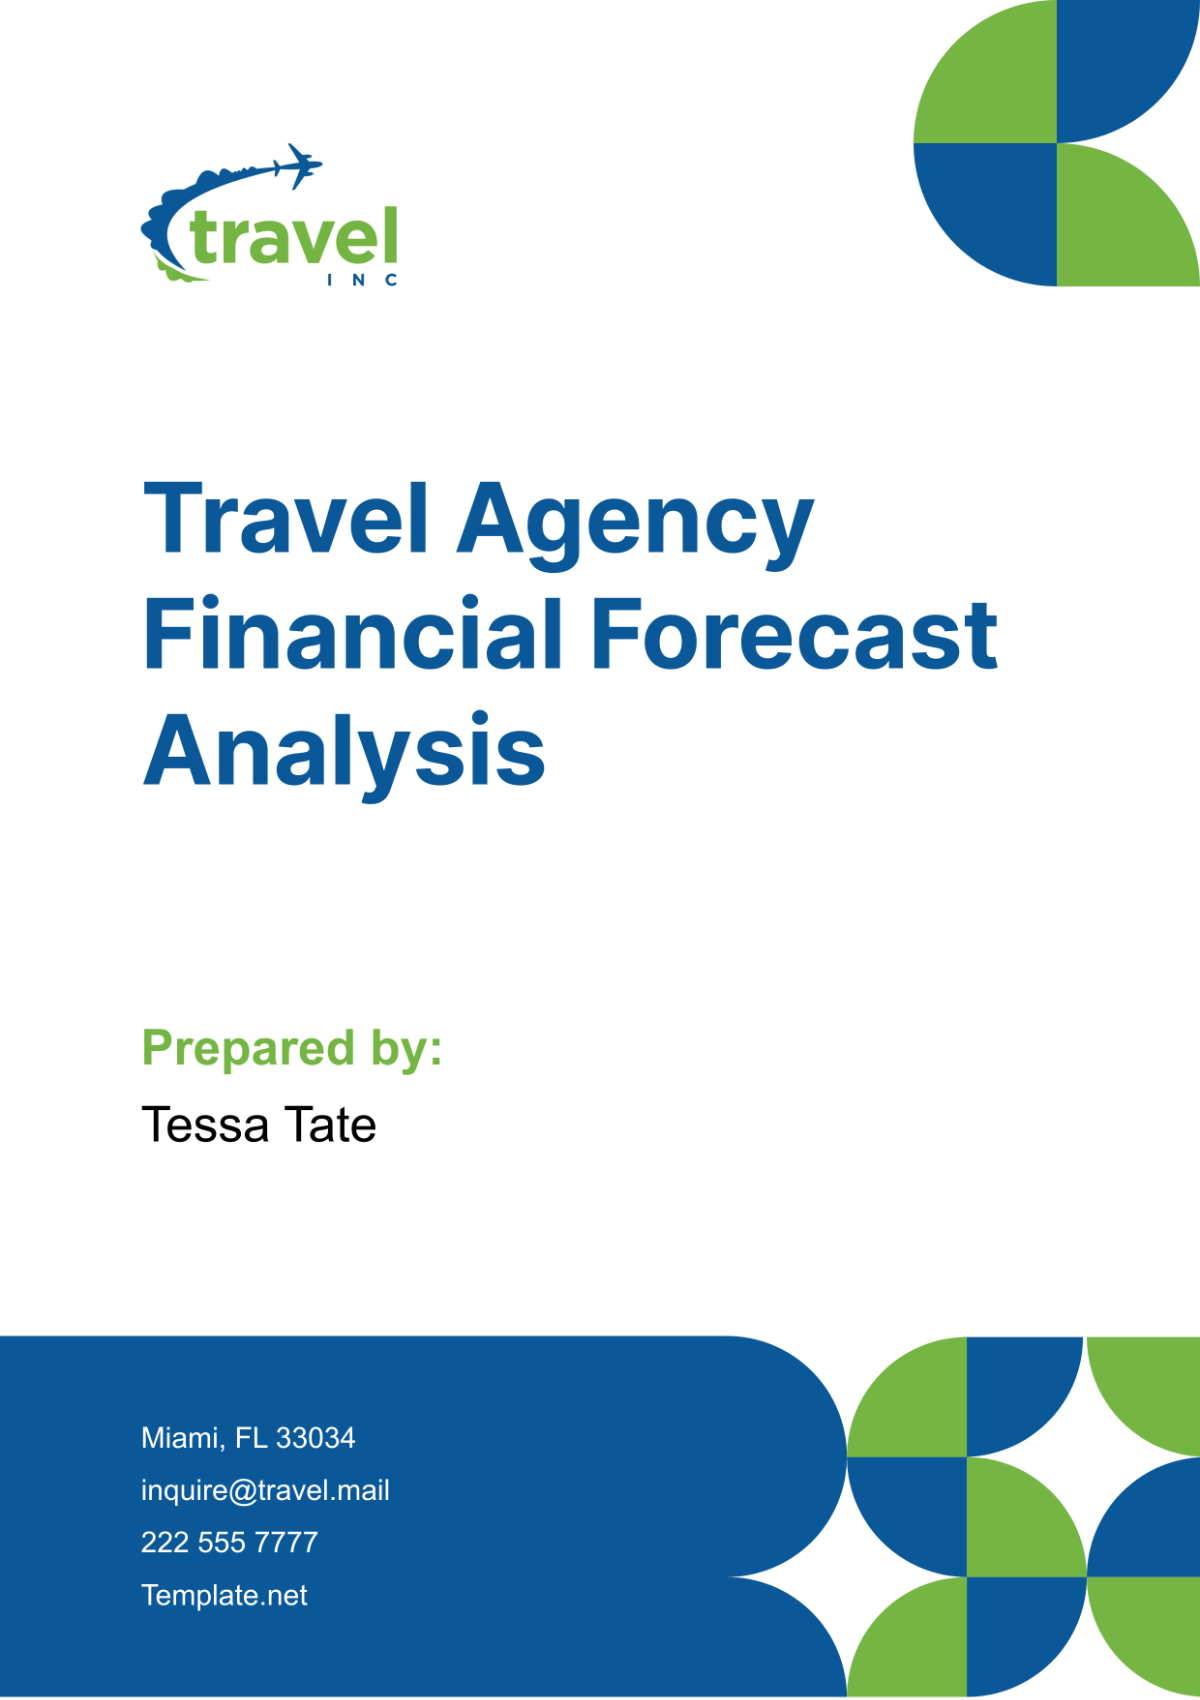 Travel Agency Financial Forecast Analysis Template